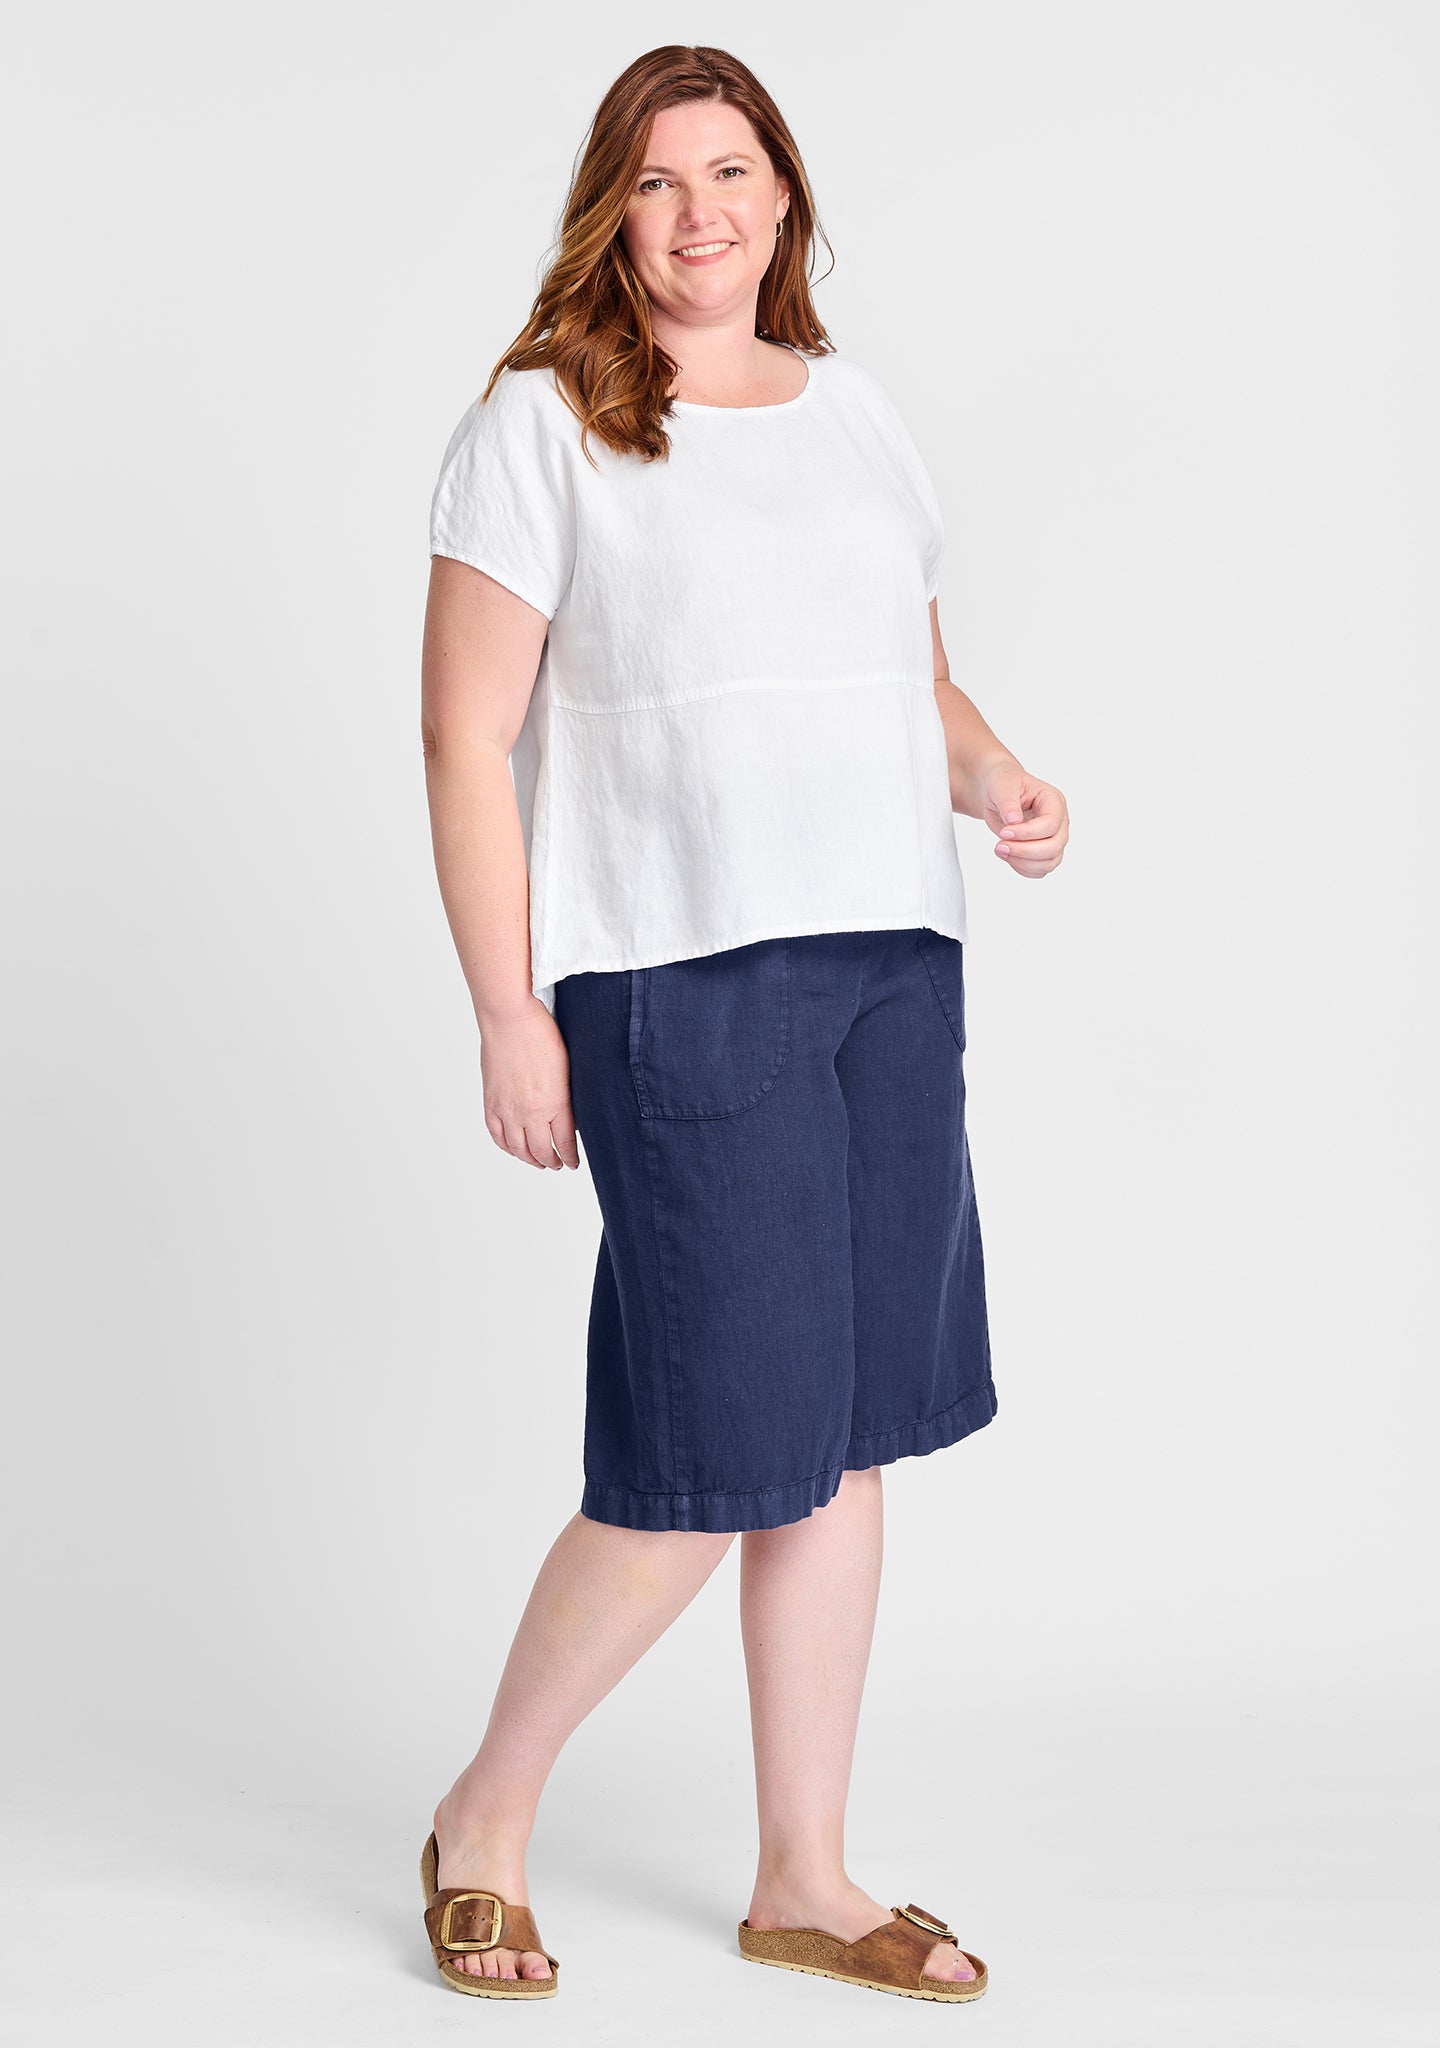 FLAX linen shirt in white with linen shorts in blue